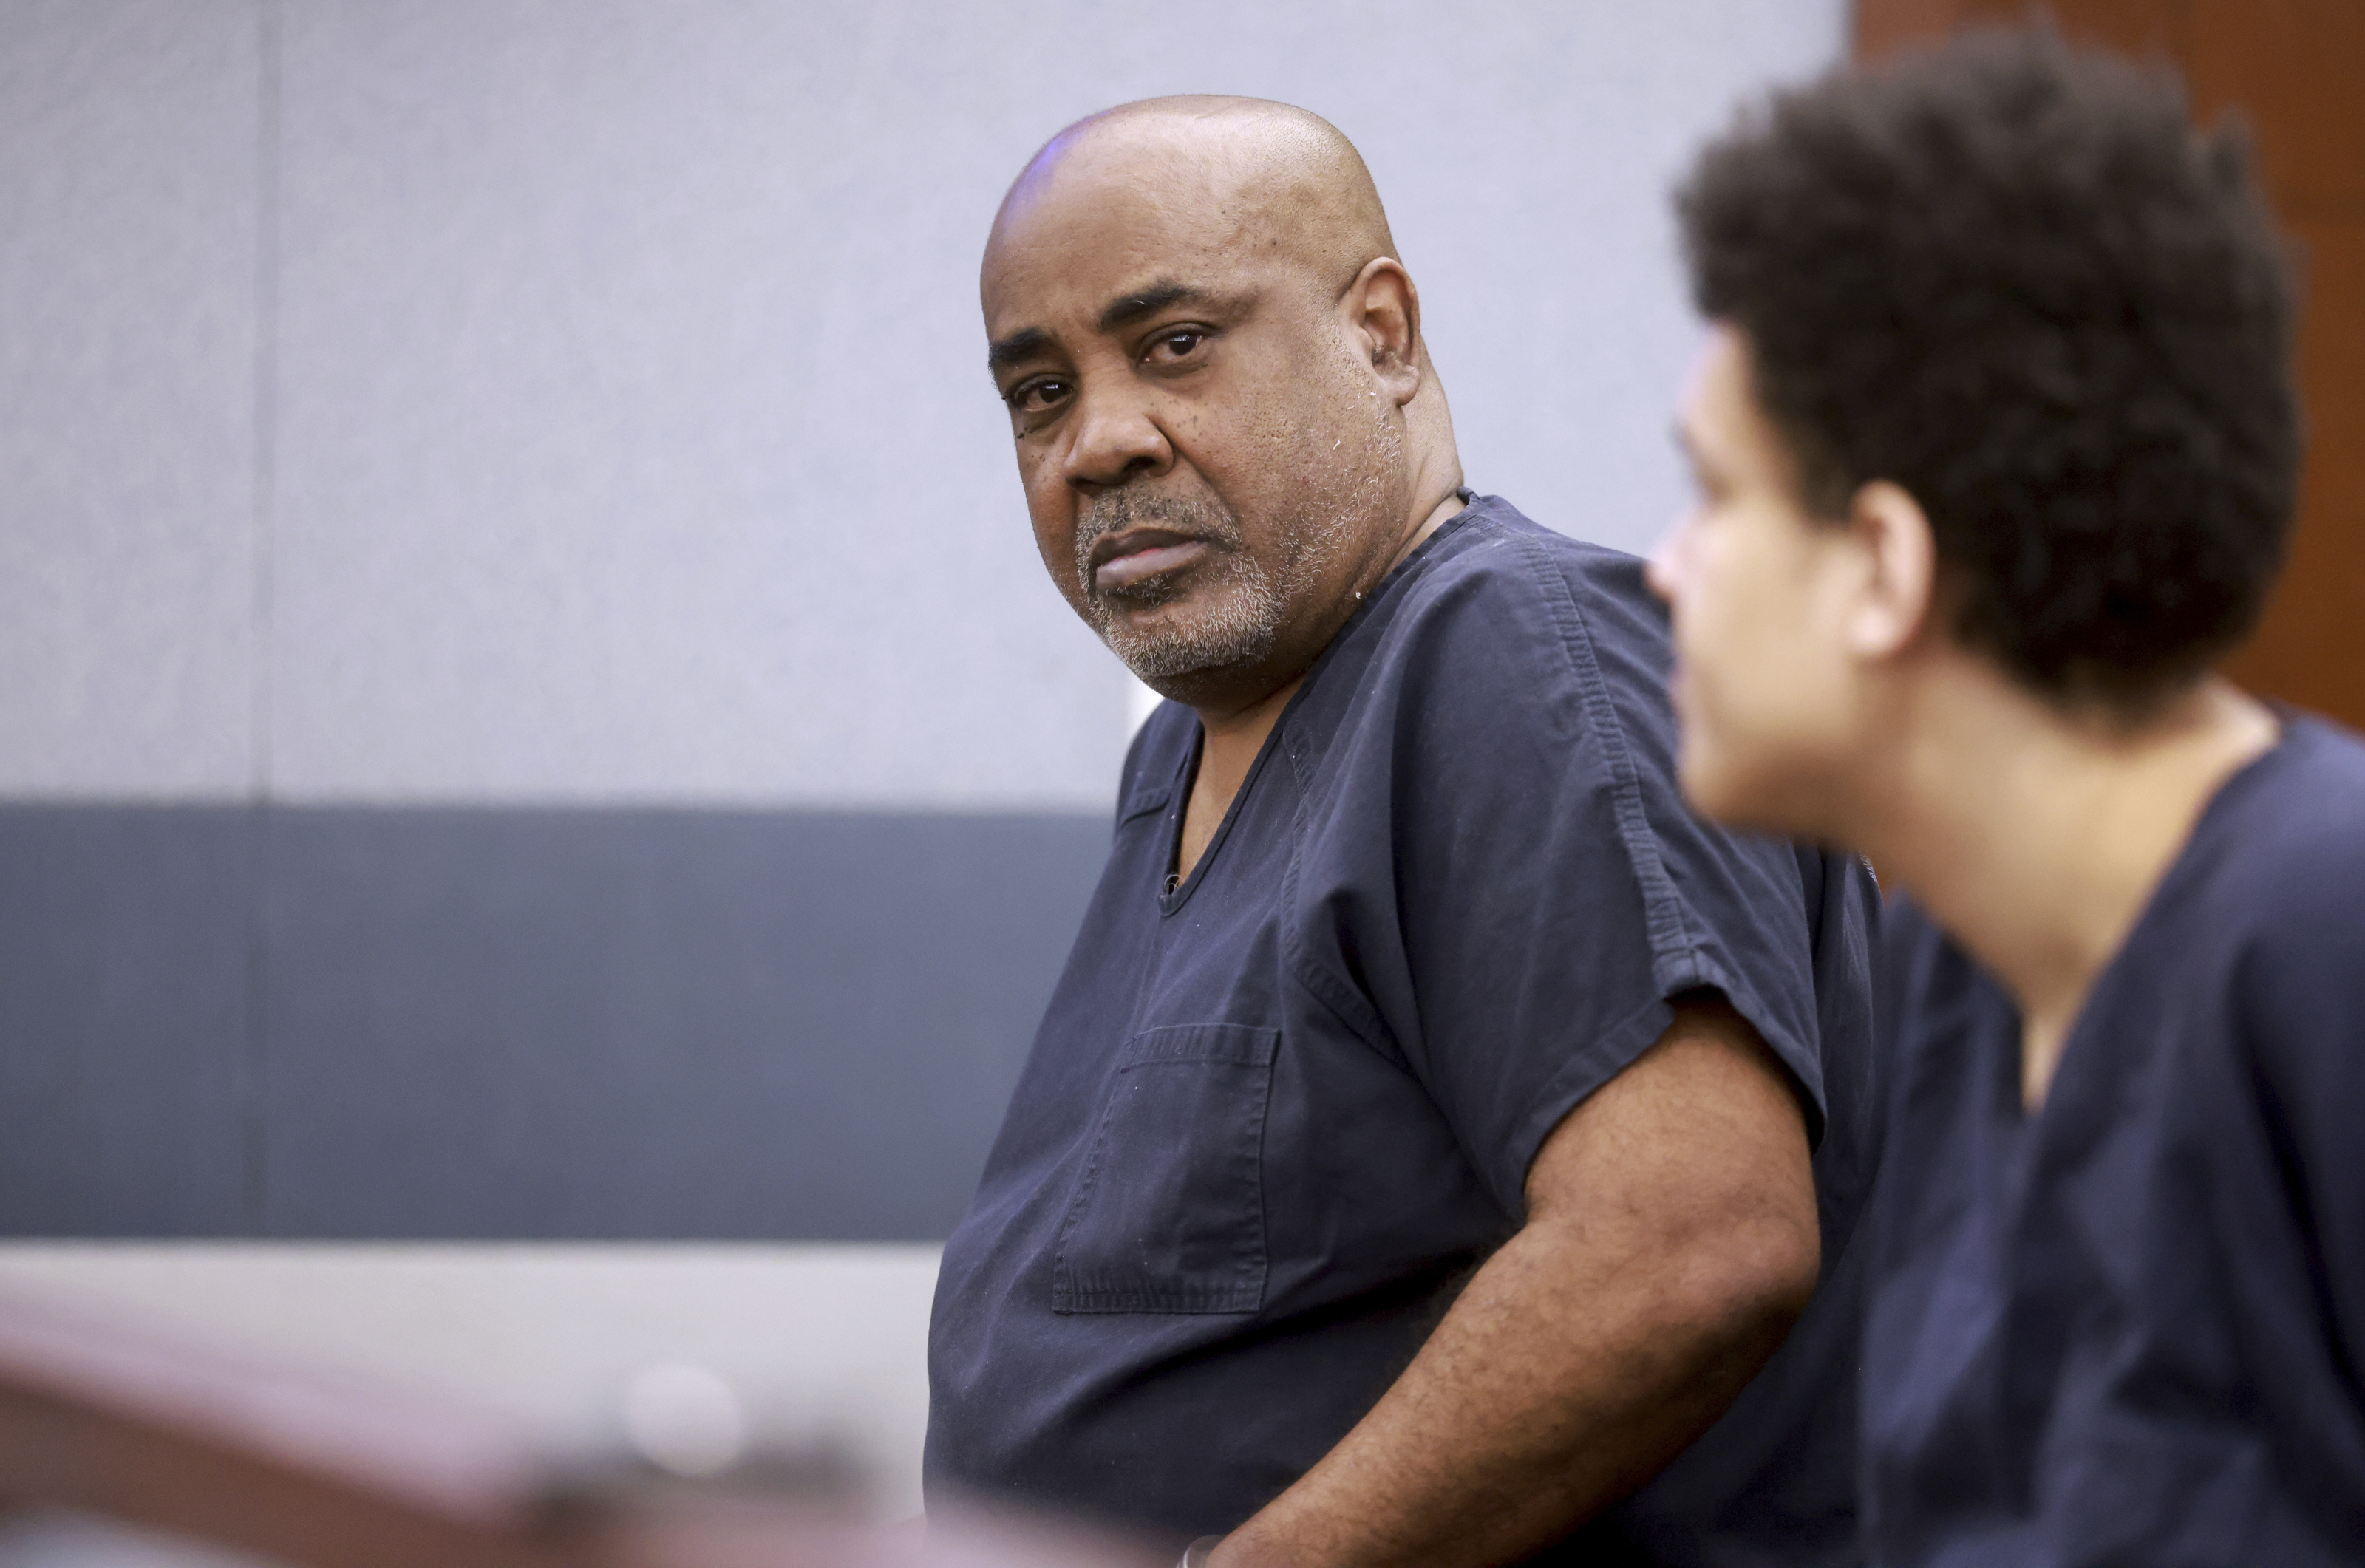 Duane "Keffe D" Davis, who is accused of orchestrating the 1996 slaying of hip-hop icon Tupac Shakur, center, waits to appear in court at the Regional Justice Center in Las Vegas, Tuesday, June 25, 2024. (K.M. Cannon/Las Vegas Review-Journal via AP, Pool)